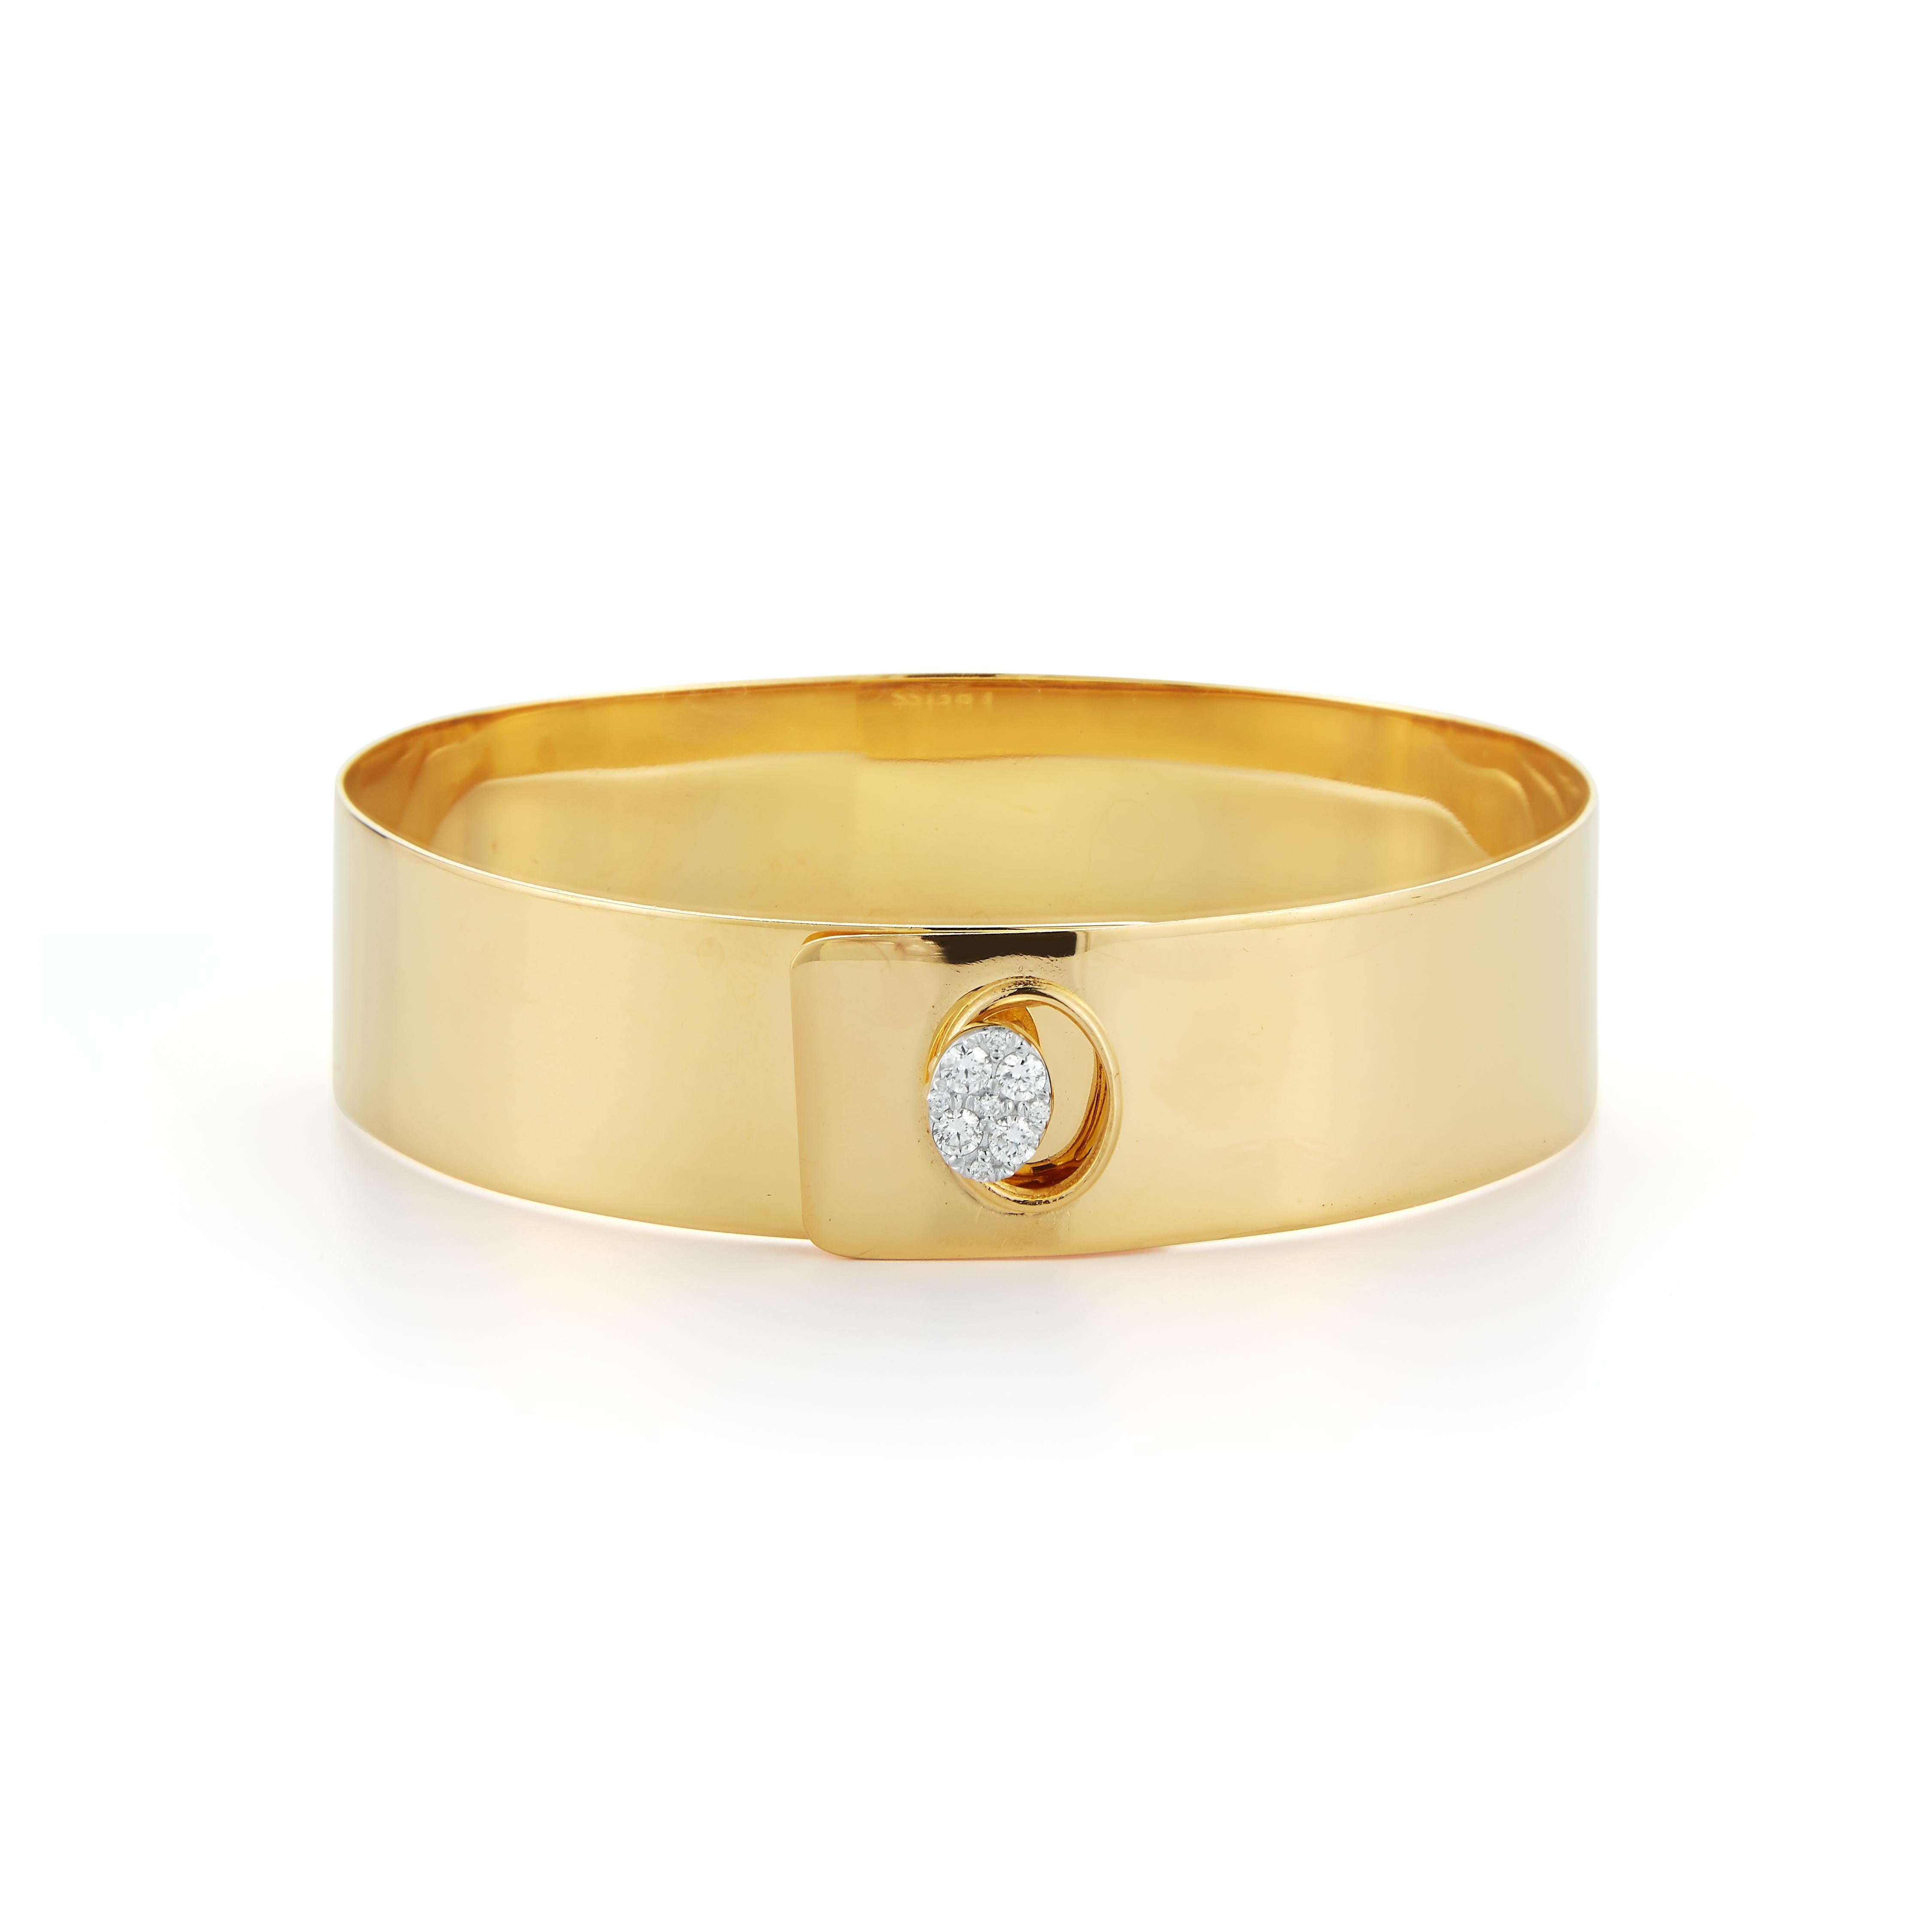 14 Karat Yellow Gold Hand-Crafted Polish-Finished Bangle Bracelet, Accented with 0.23 Carats of a Pave Set Diamond Button Designed with a Buckle Clasp.
